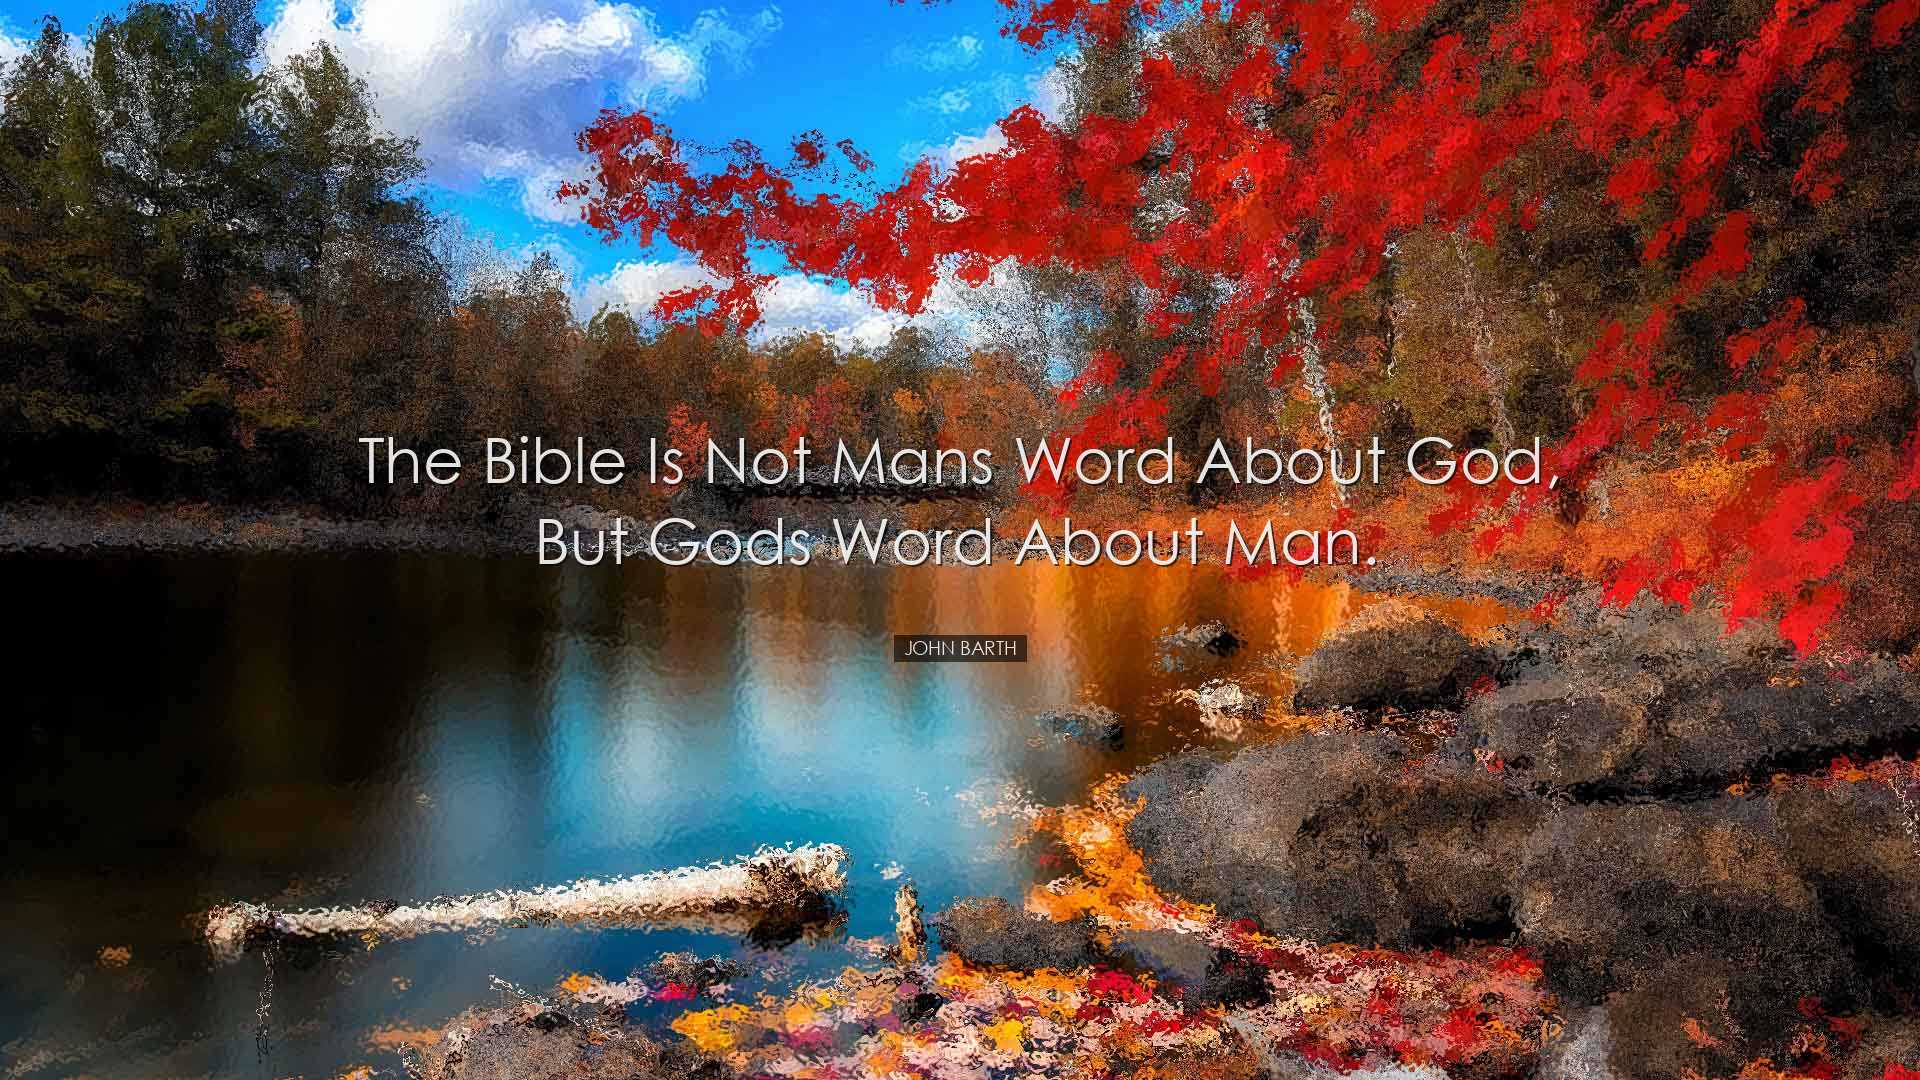 The Bible is not mans word about God, but Gods word about man. - J